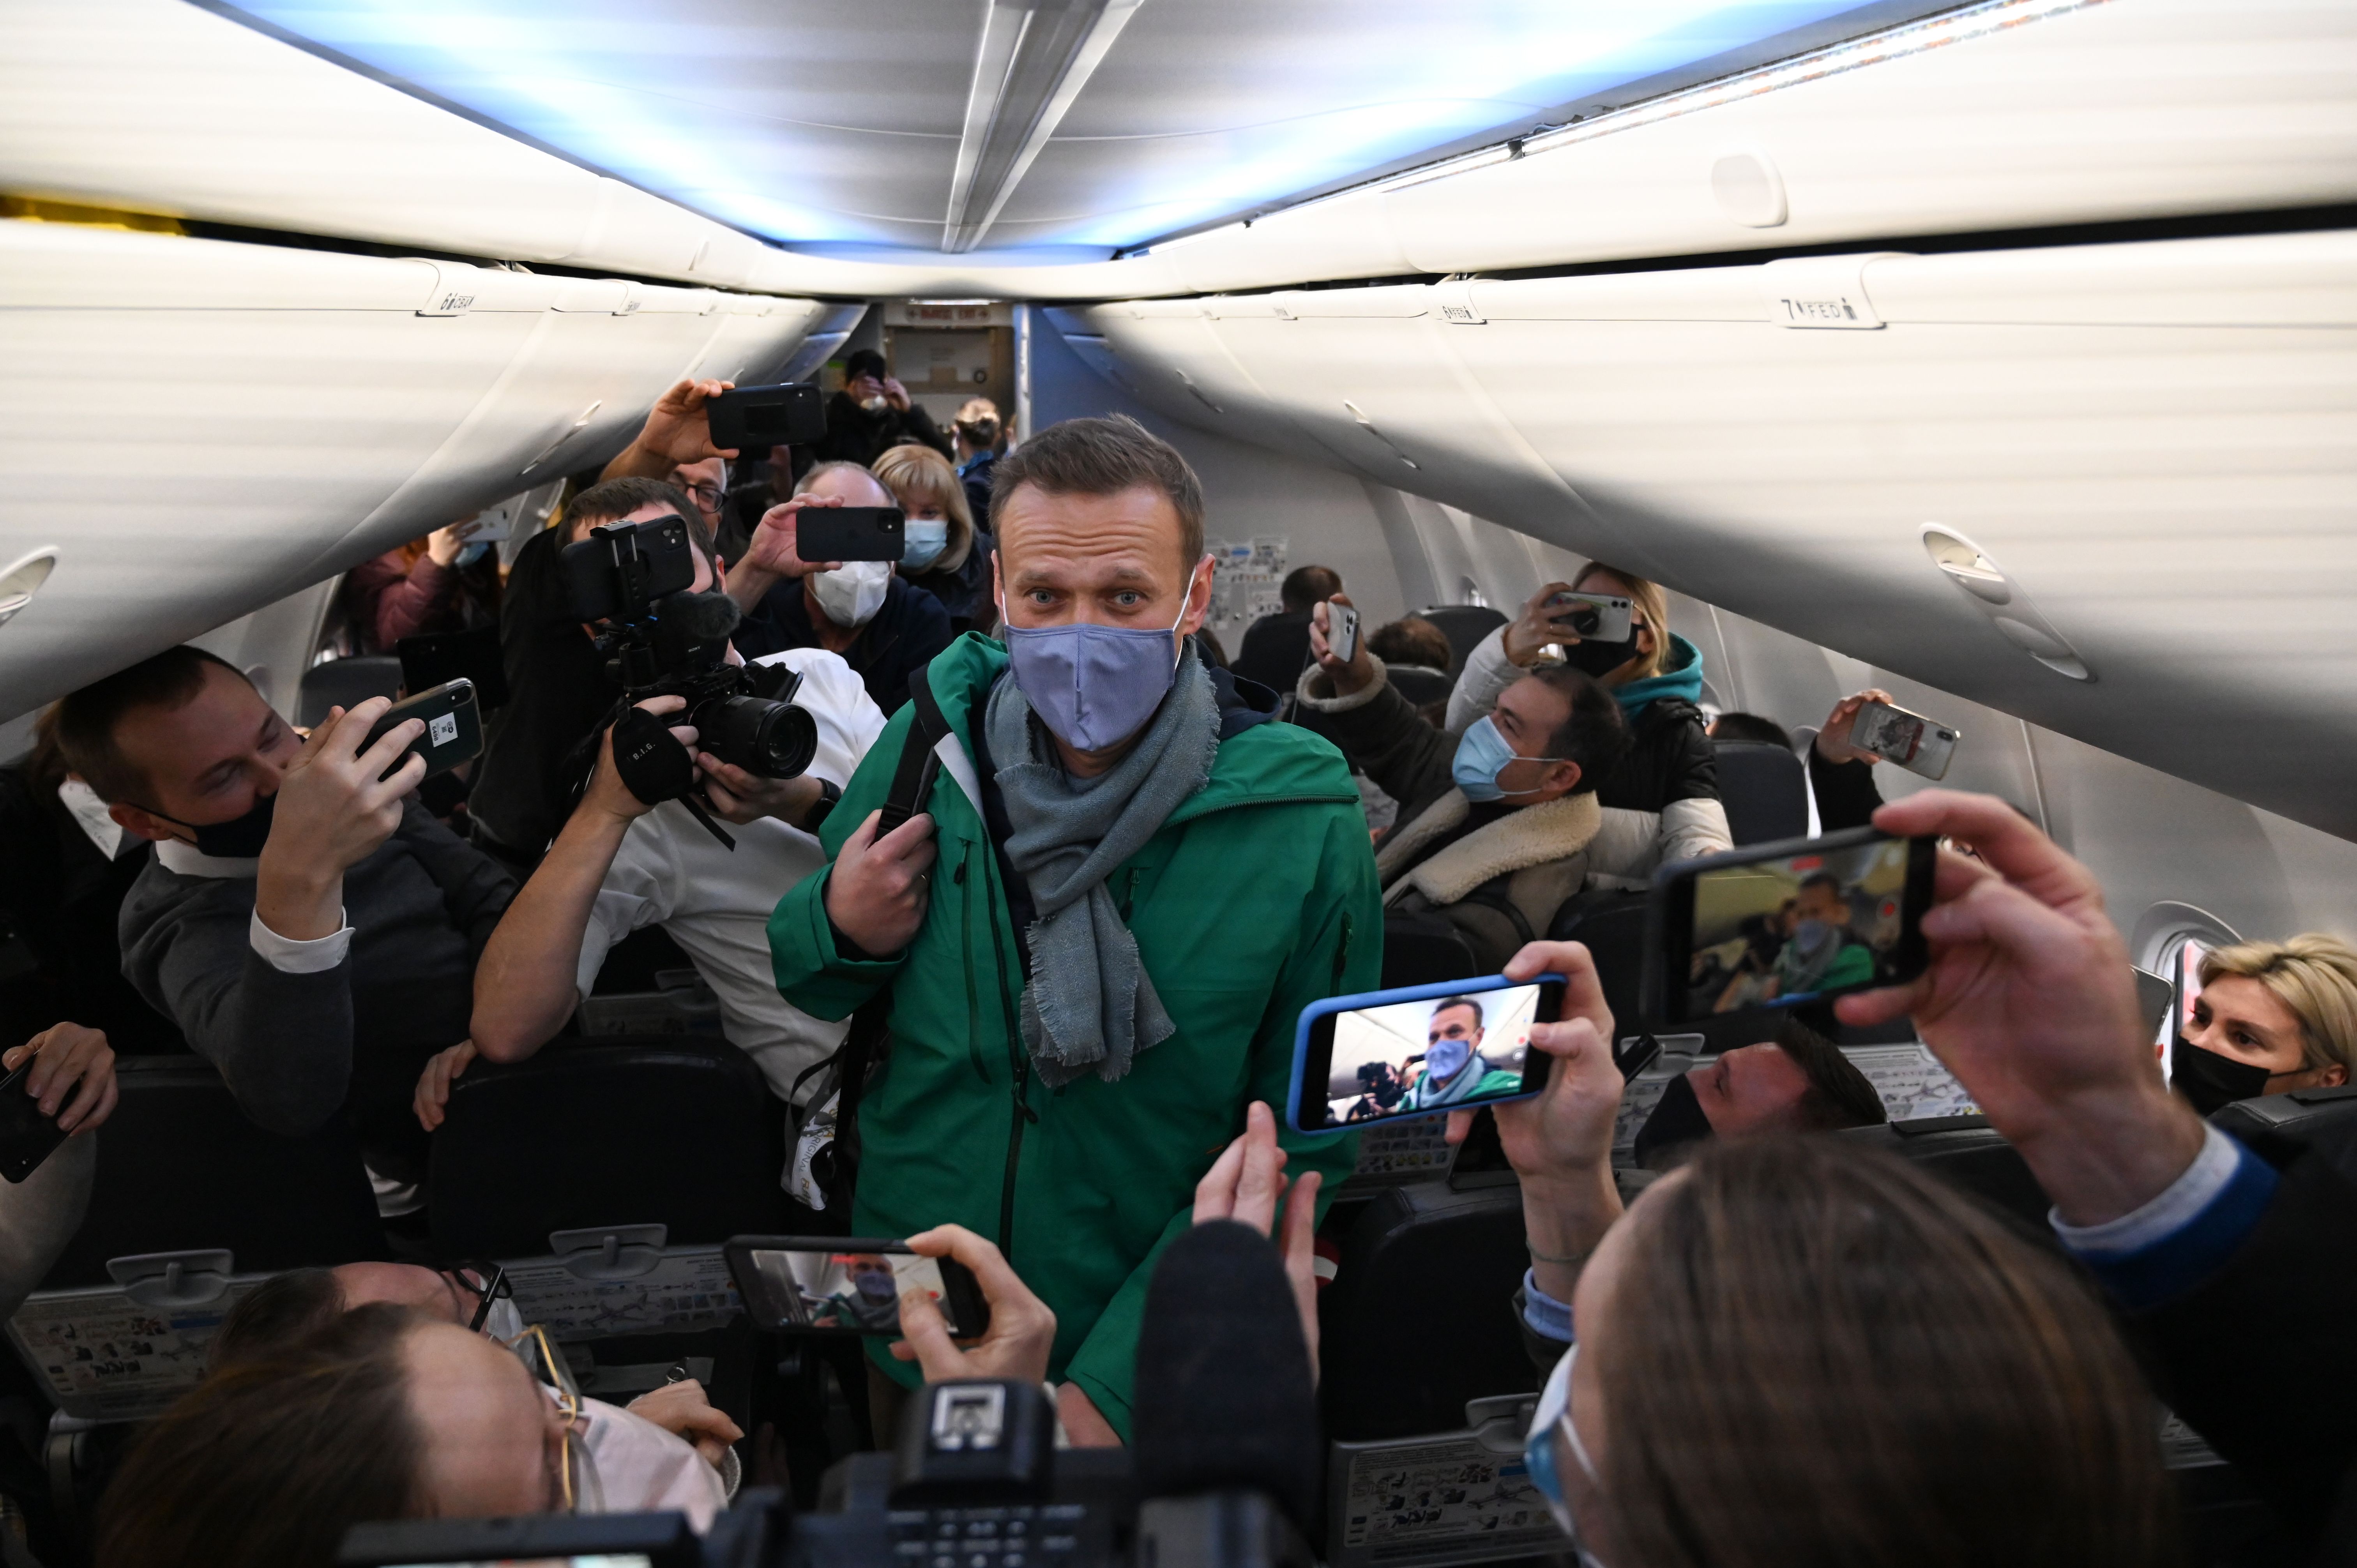 Navalny takes his seat on a Moscow-bound plane before taking off from Berlin in January 2021. Navalny was detained by police moments after landing in Russia.